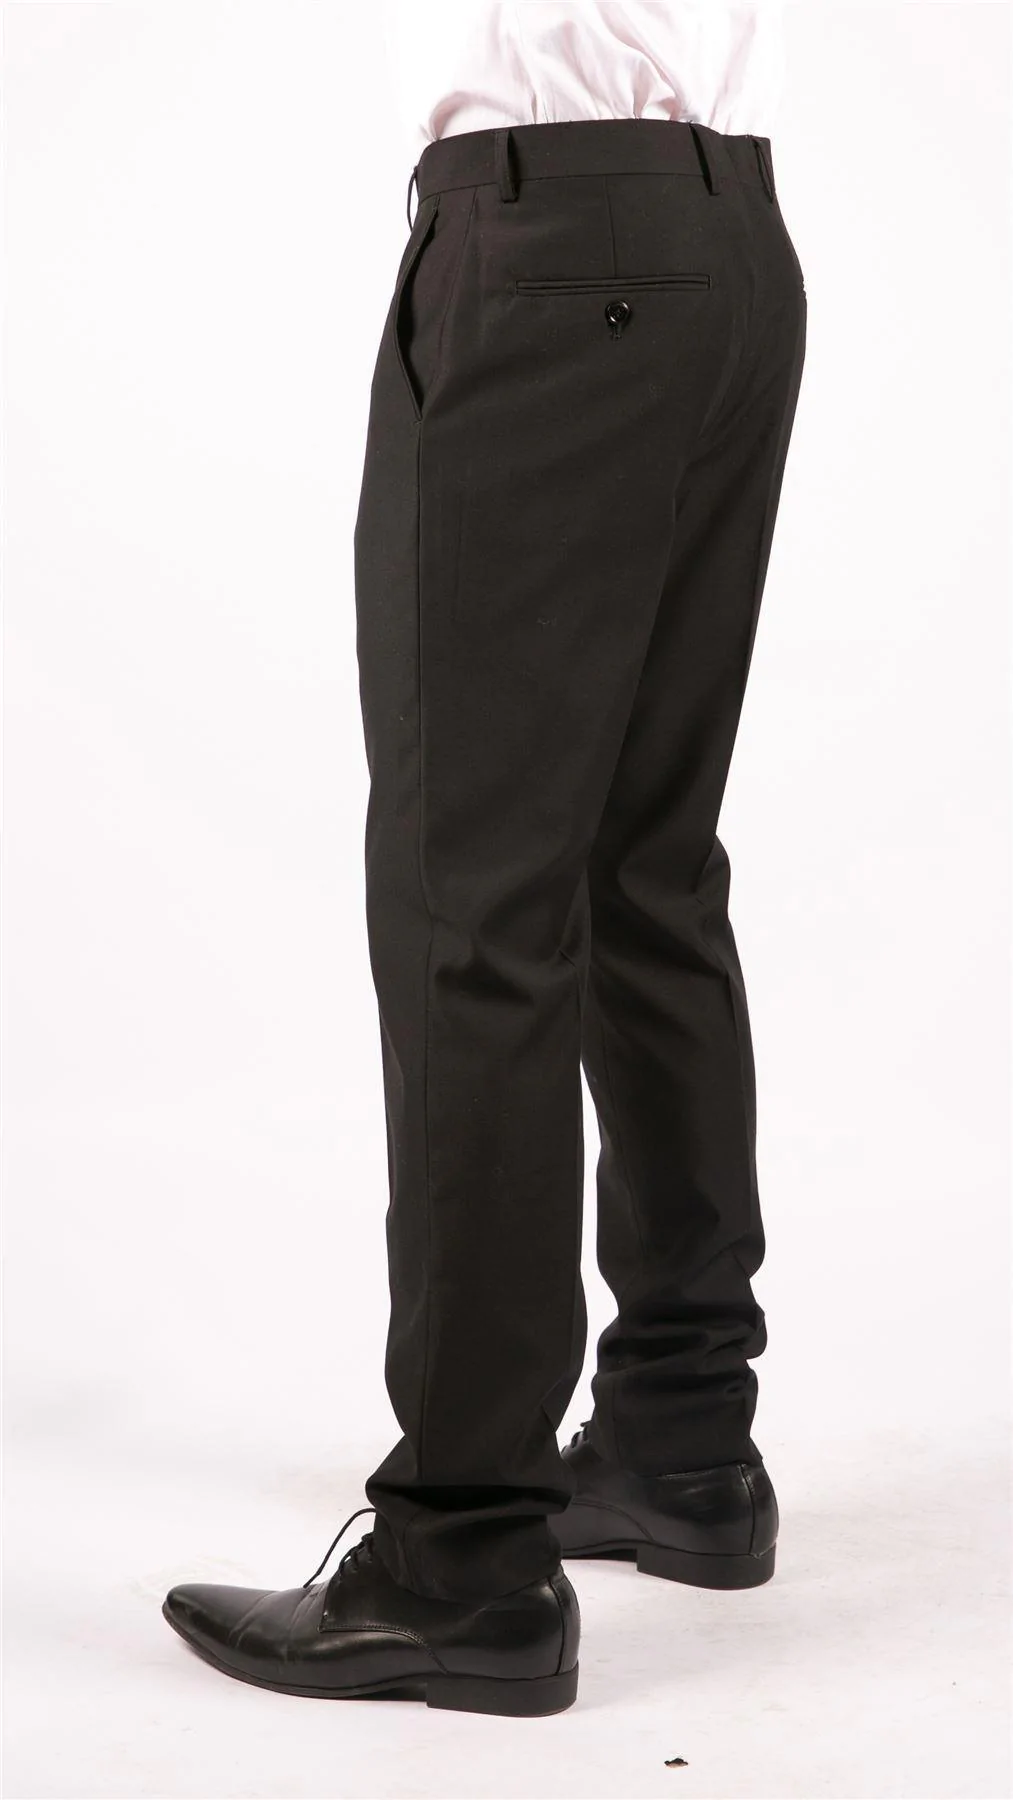 shelikes Mens Formal Trousers Casual Business Office India | Ubuy